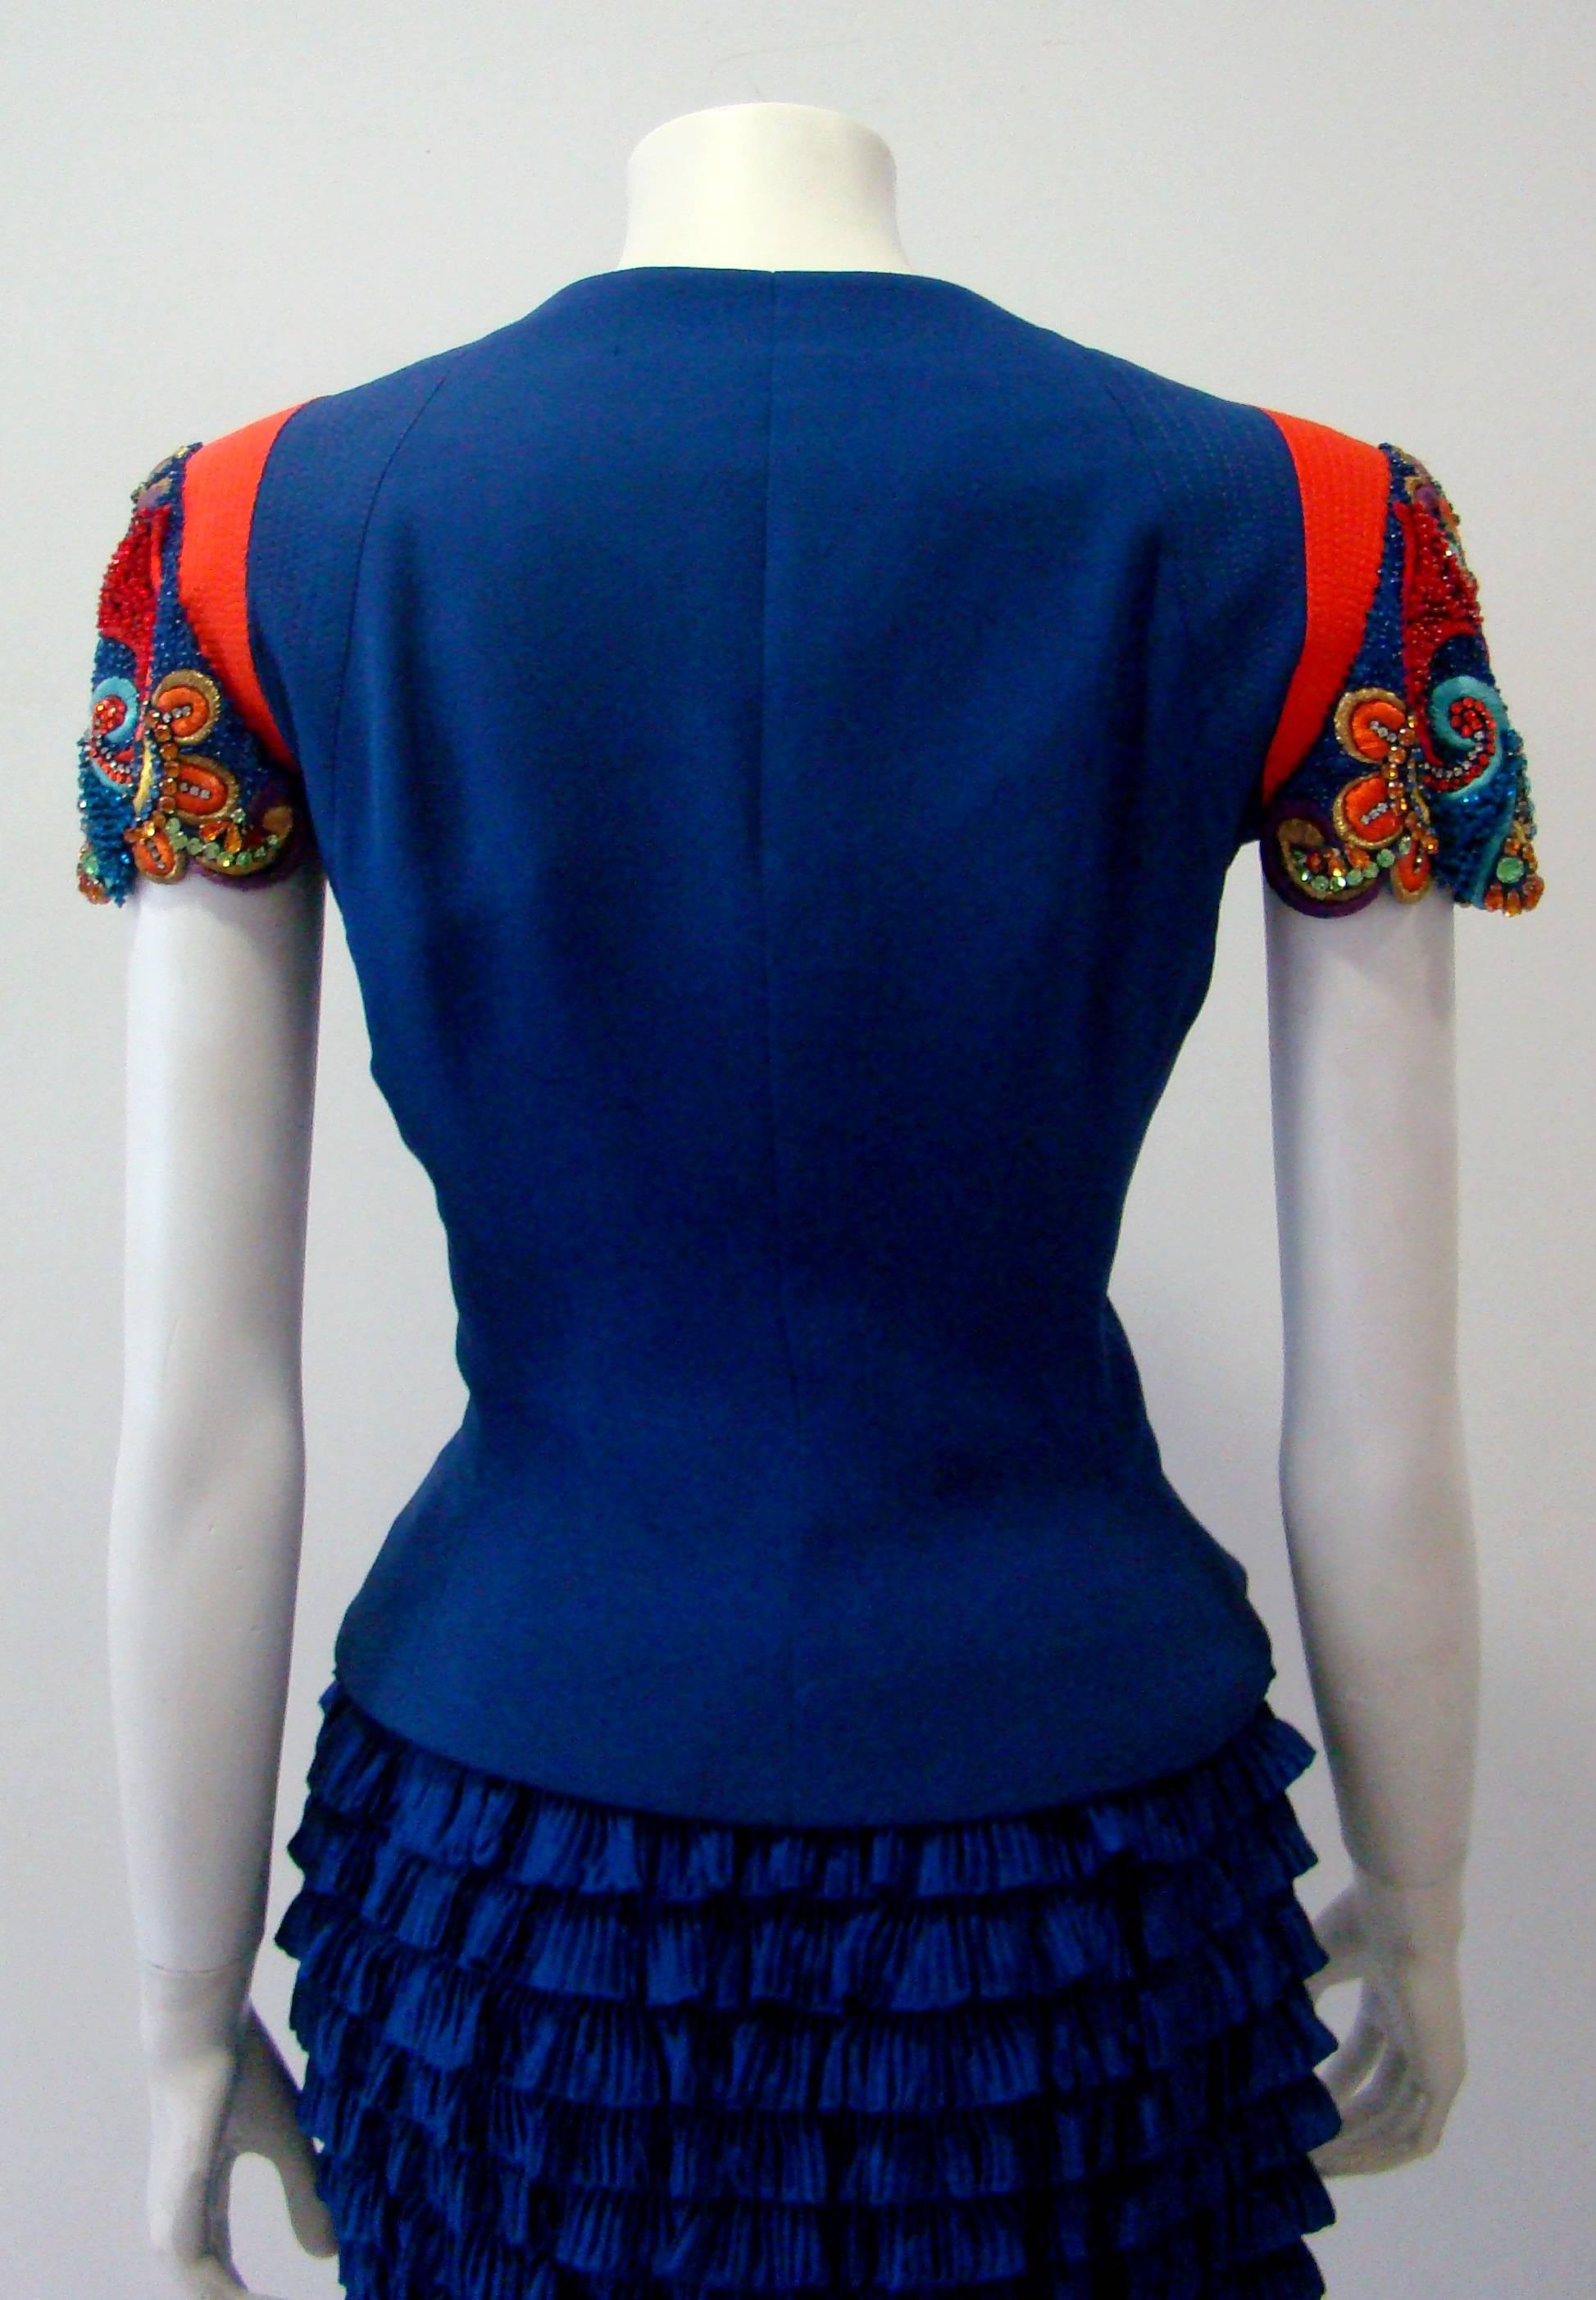 Exceptional Gianni Versace Couture Embroidered Beaded Jacket For Sale 1